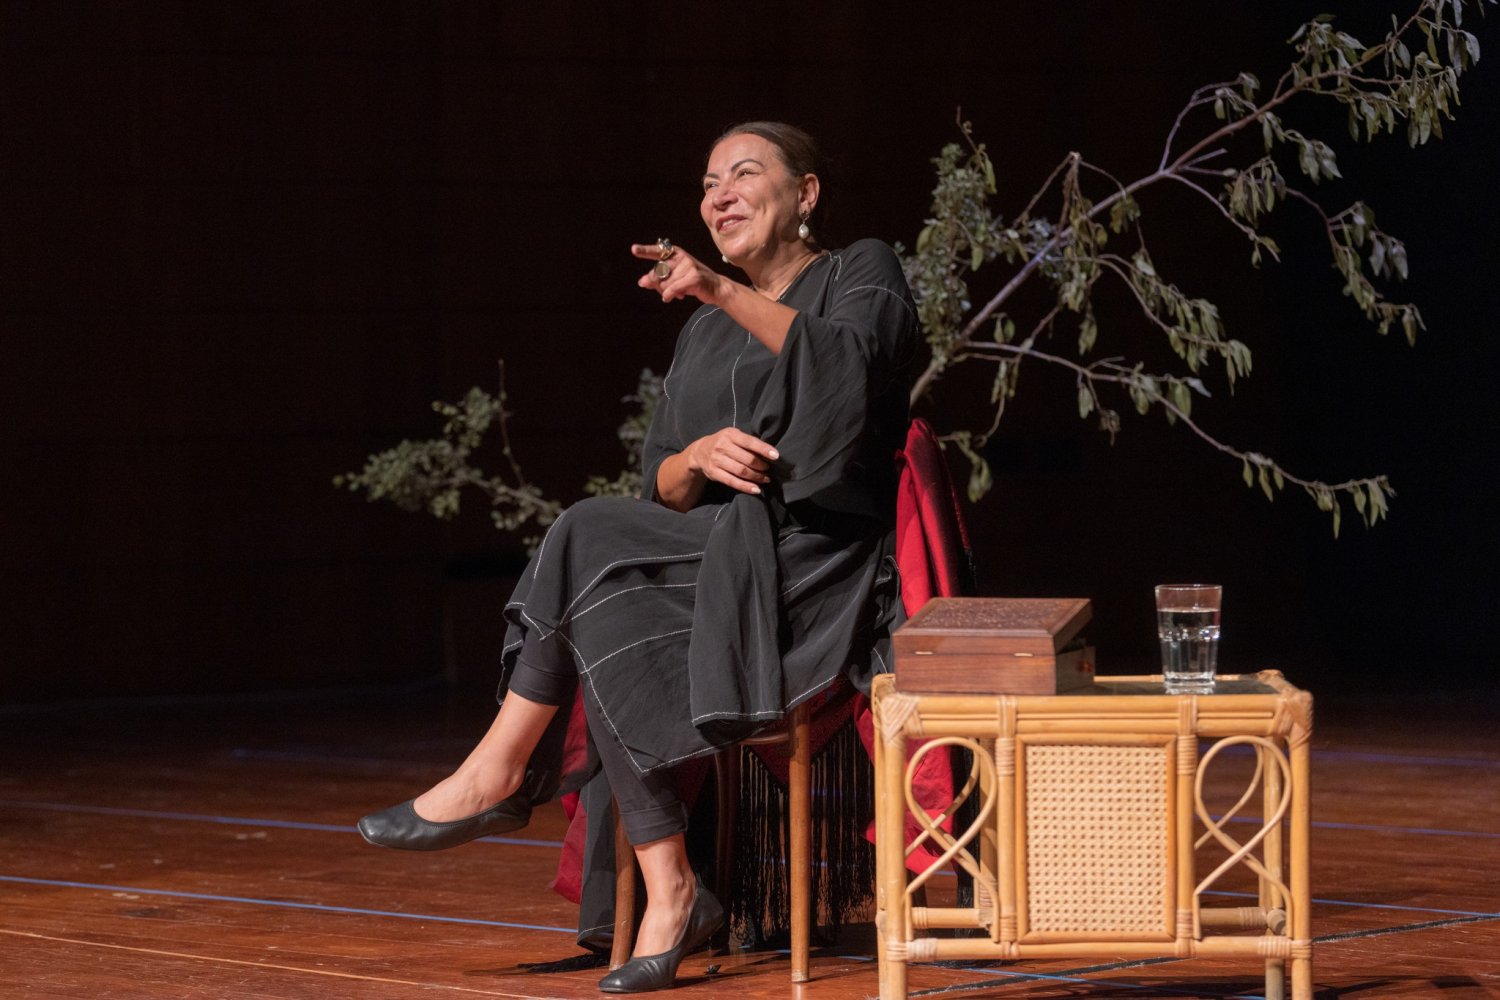 Raeda Taha performs her monodrama, “The Fig Tree,” during a music festival in Jerusalem on September 18, 2022